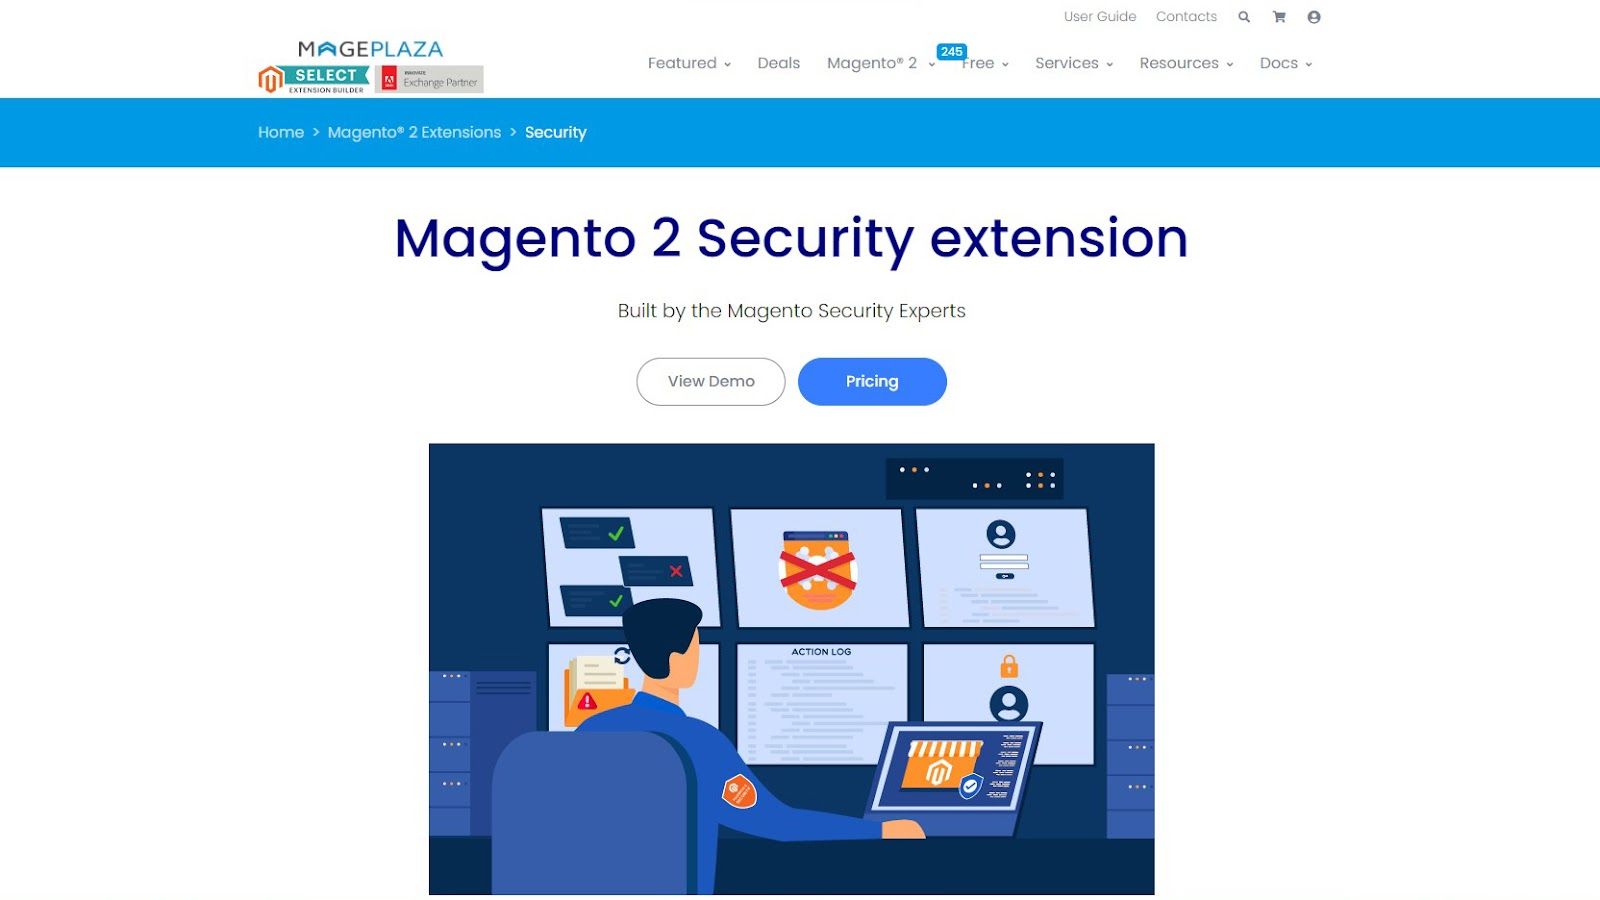 Magento security extension by Mageplaza.